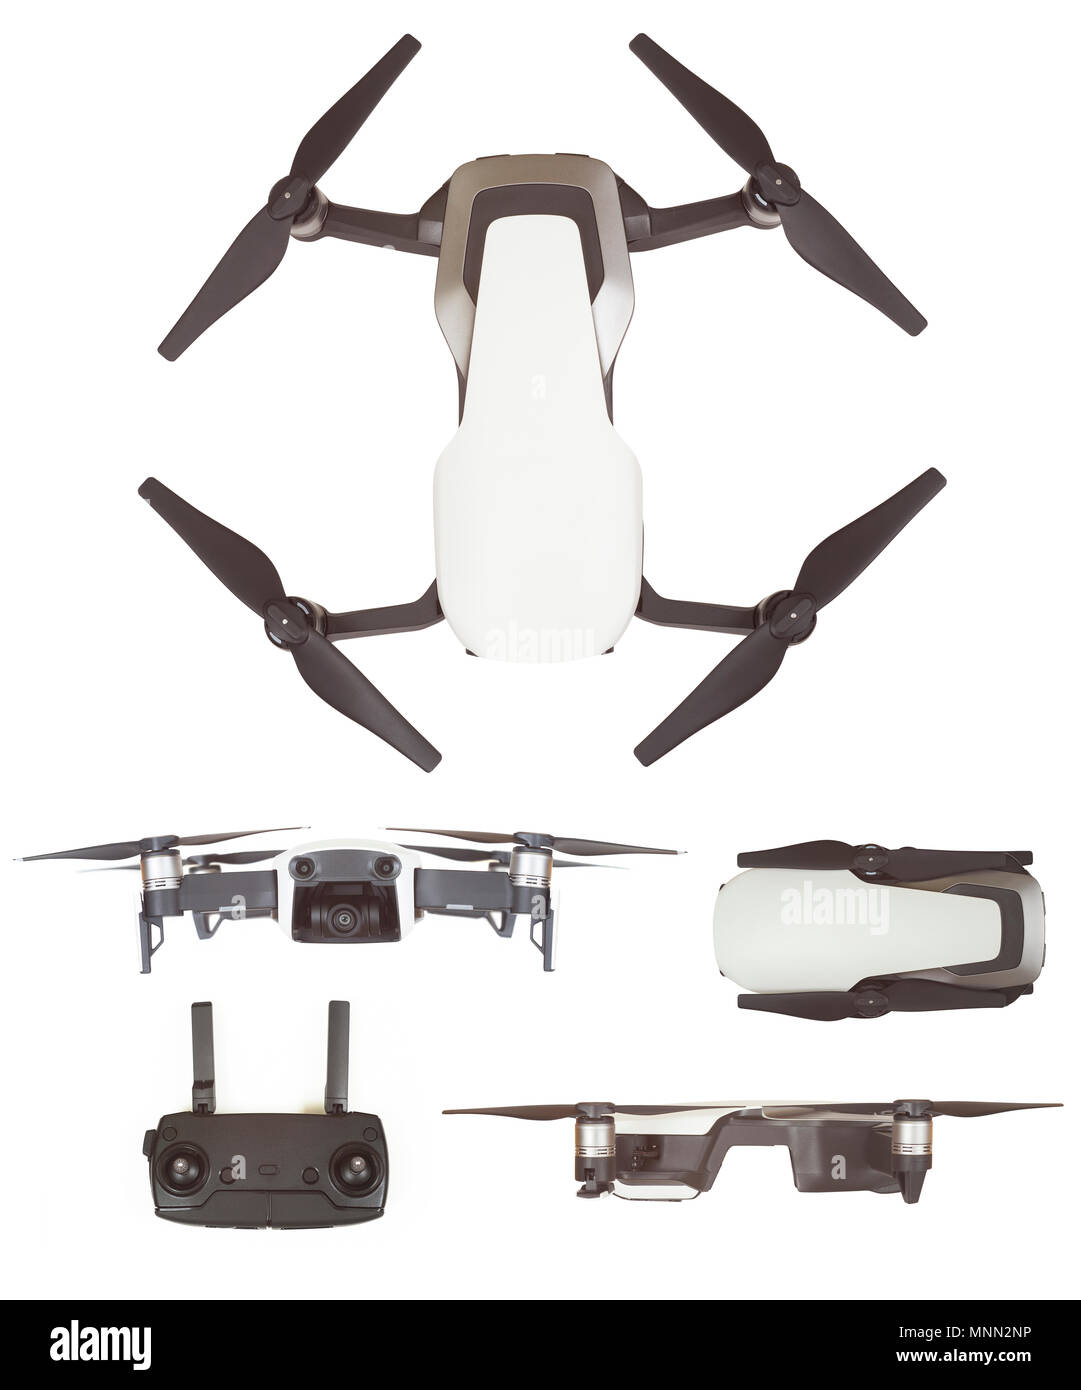 set of quadcopter drone for hobby isolated on white background Stock Photo